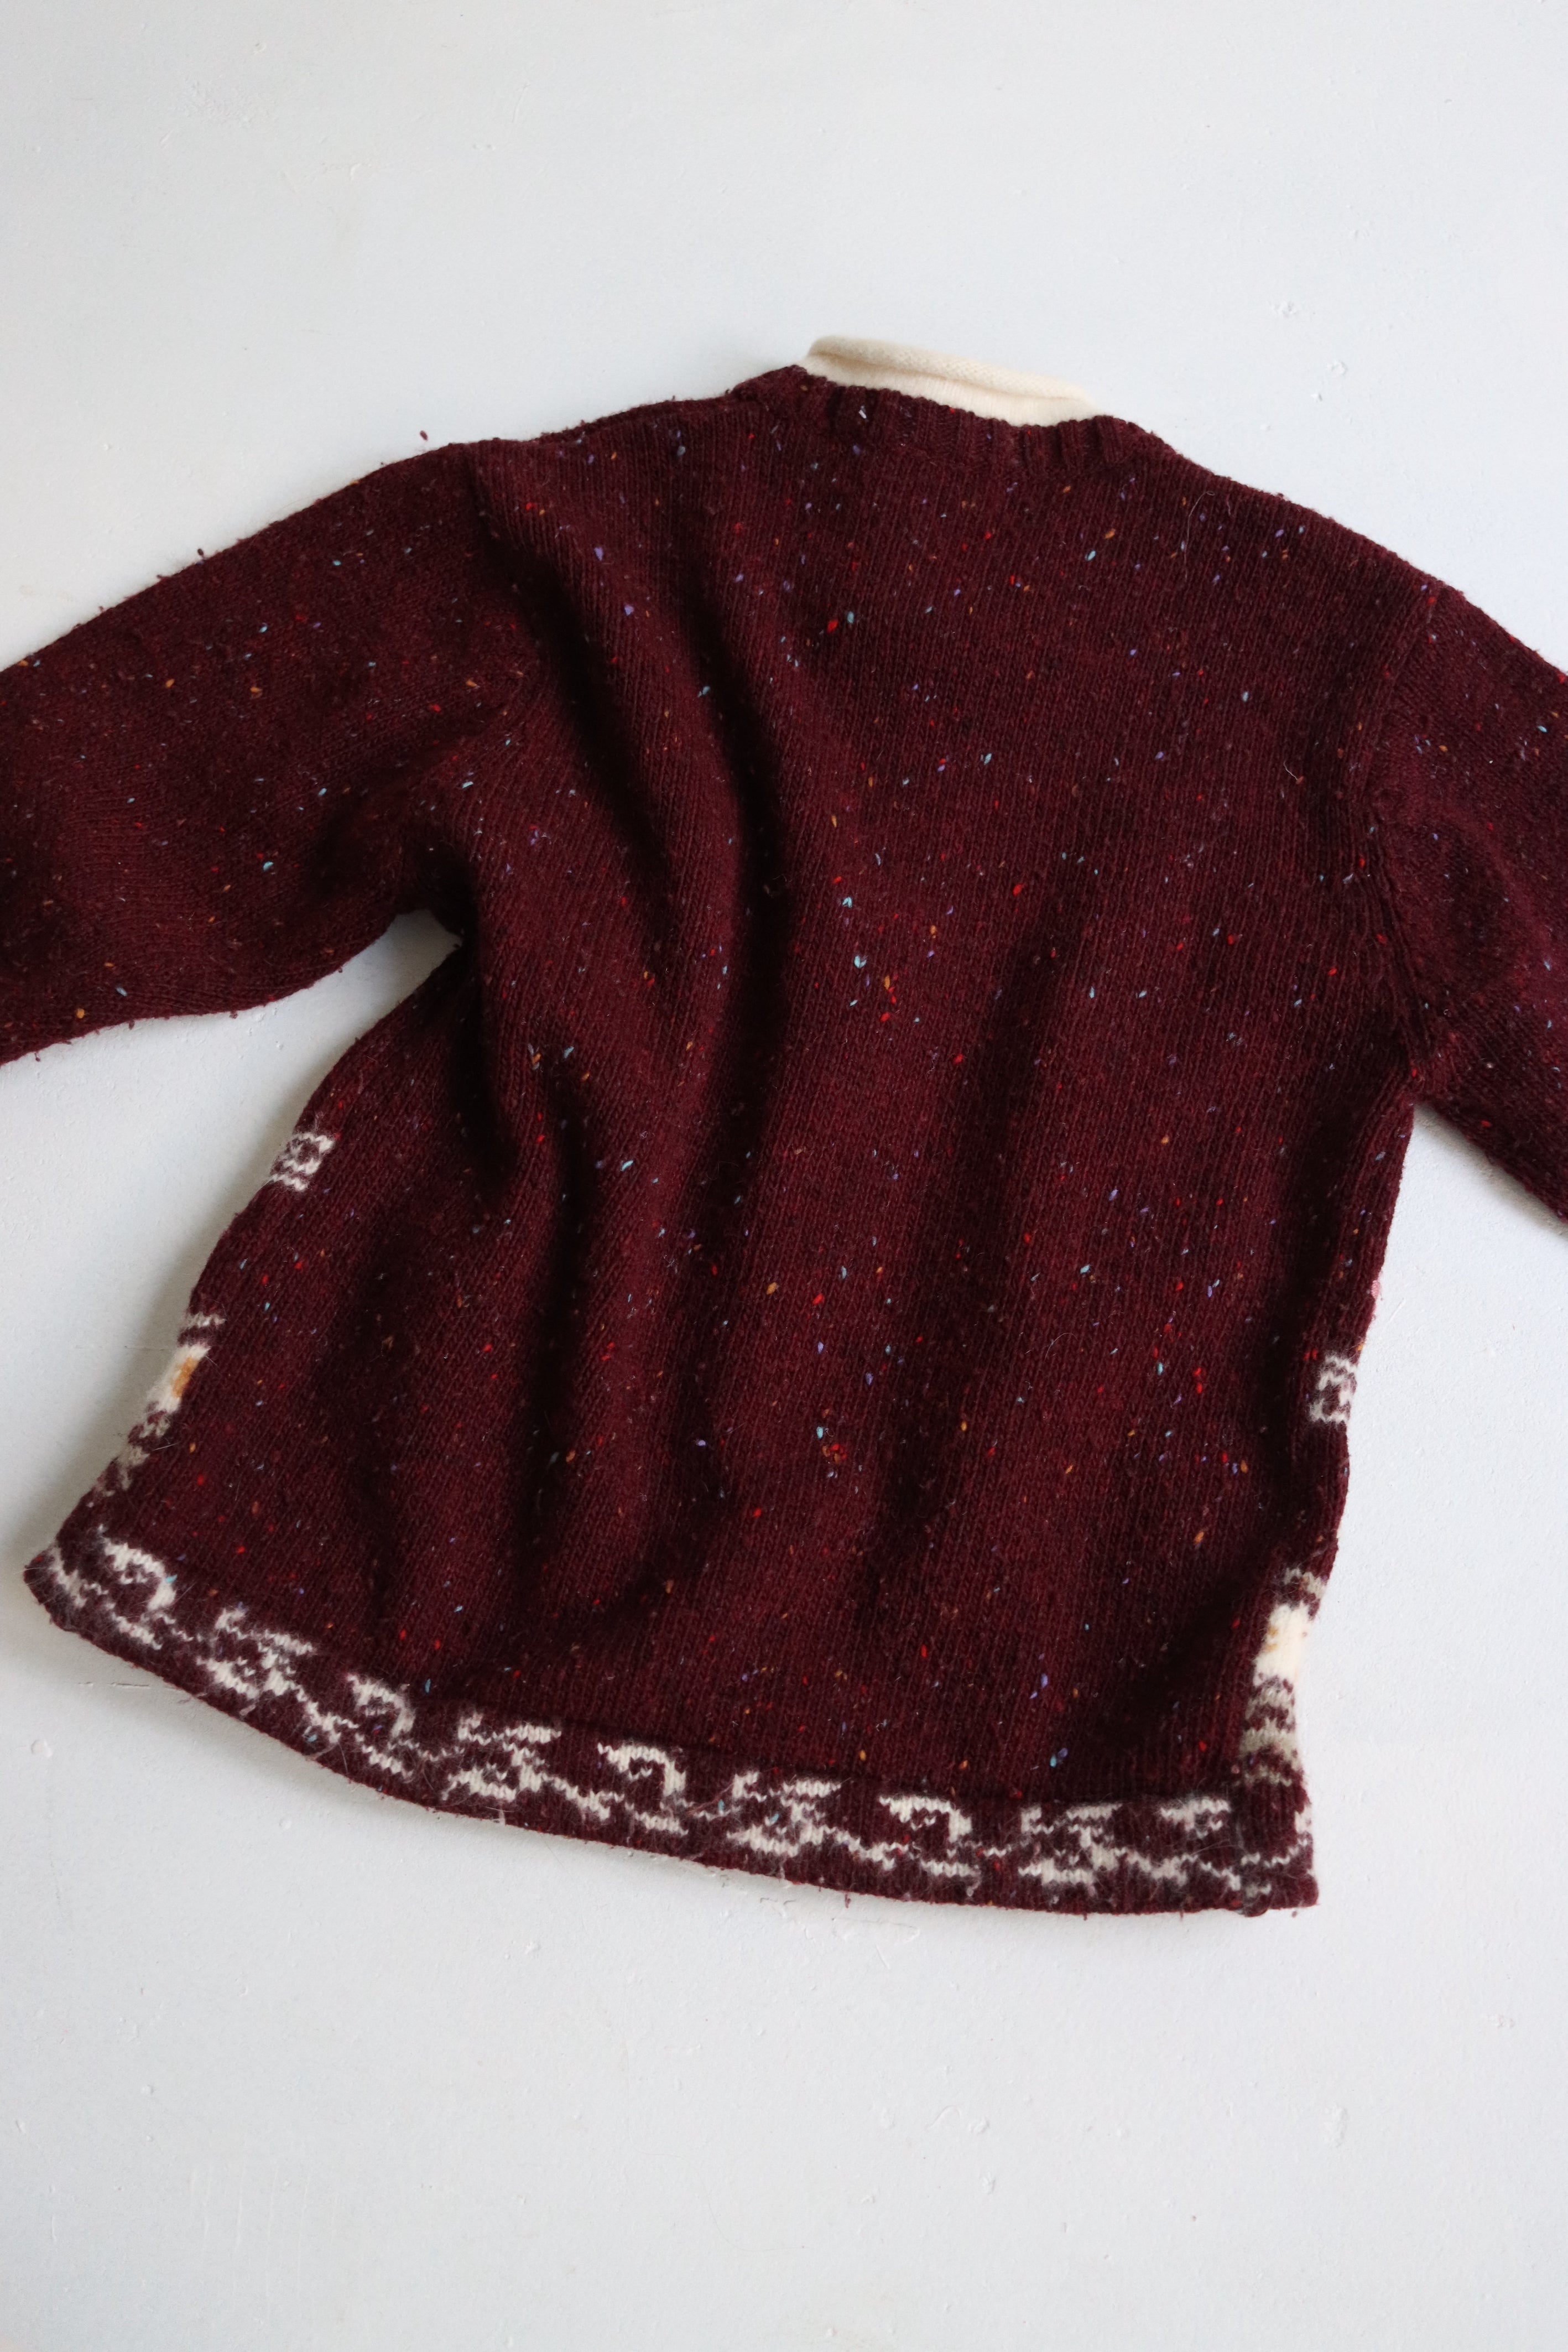 Vintage French embroidered winter sweater - Size 6-8 years